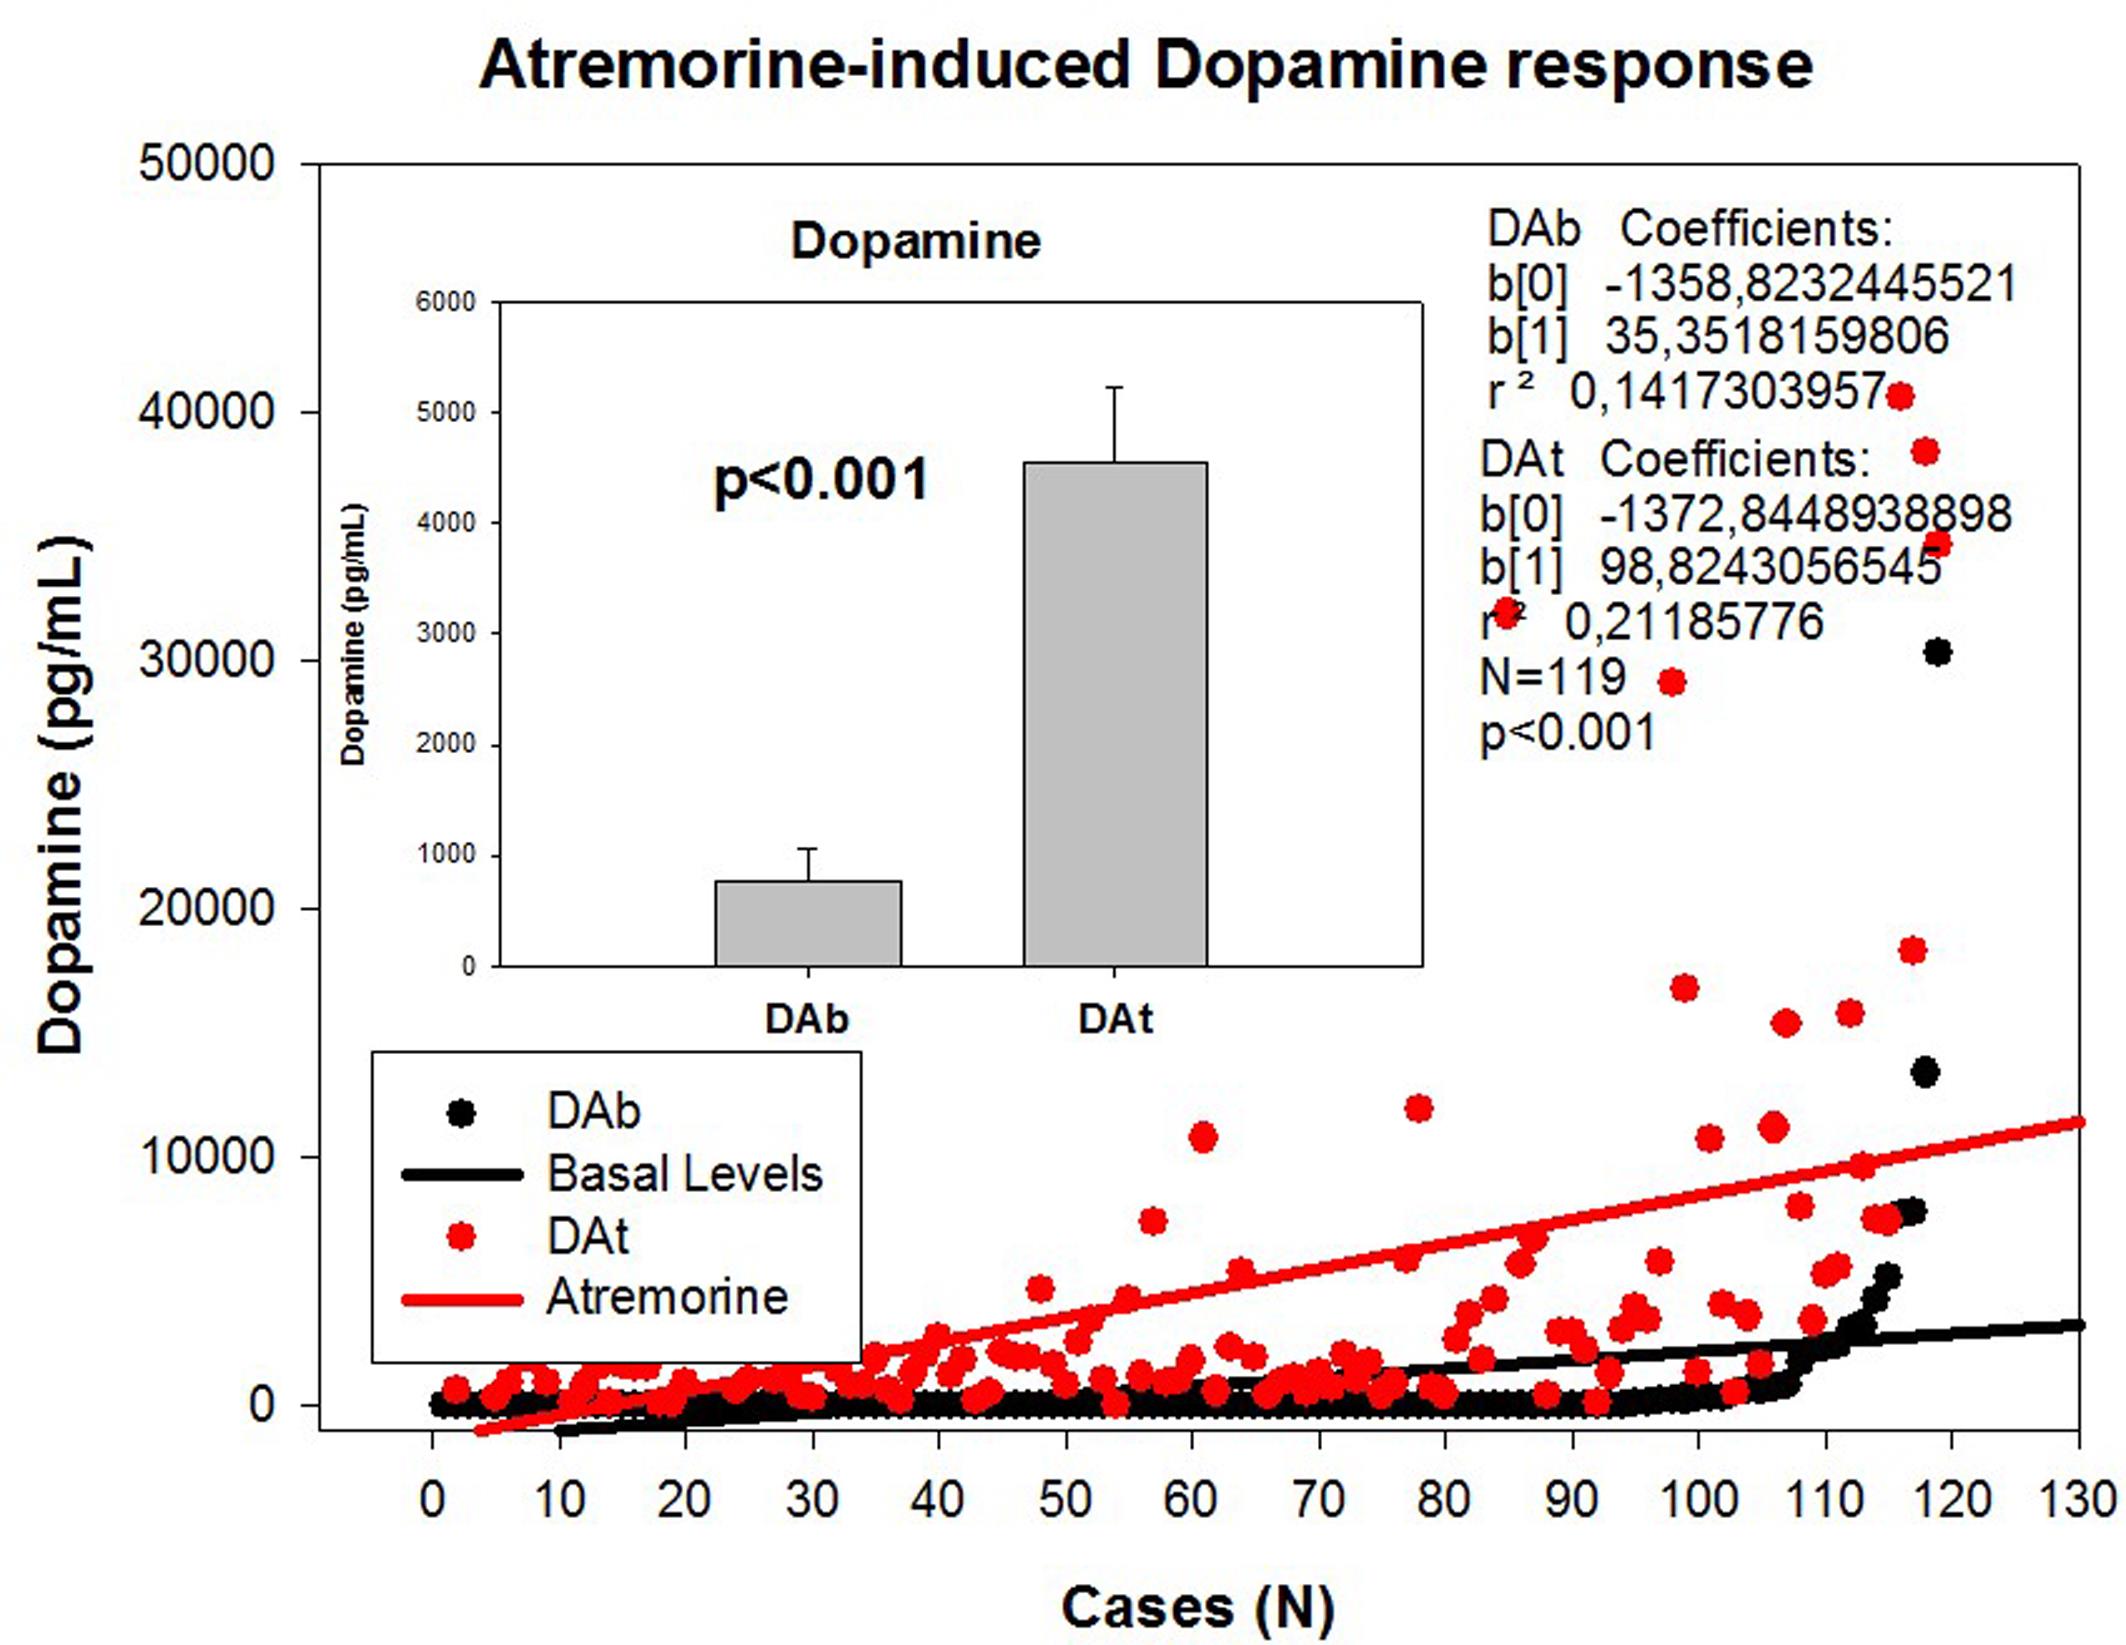 Atremorine-induced dopamine (DA) response in patients with Parkinsonian disorders.